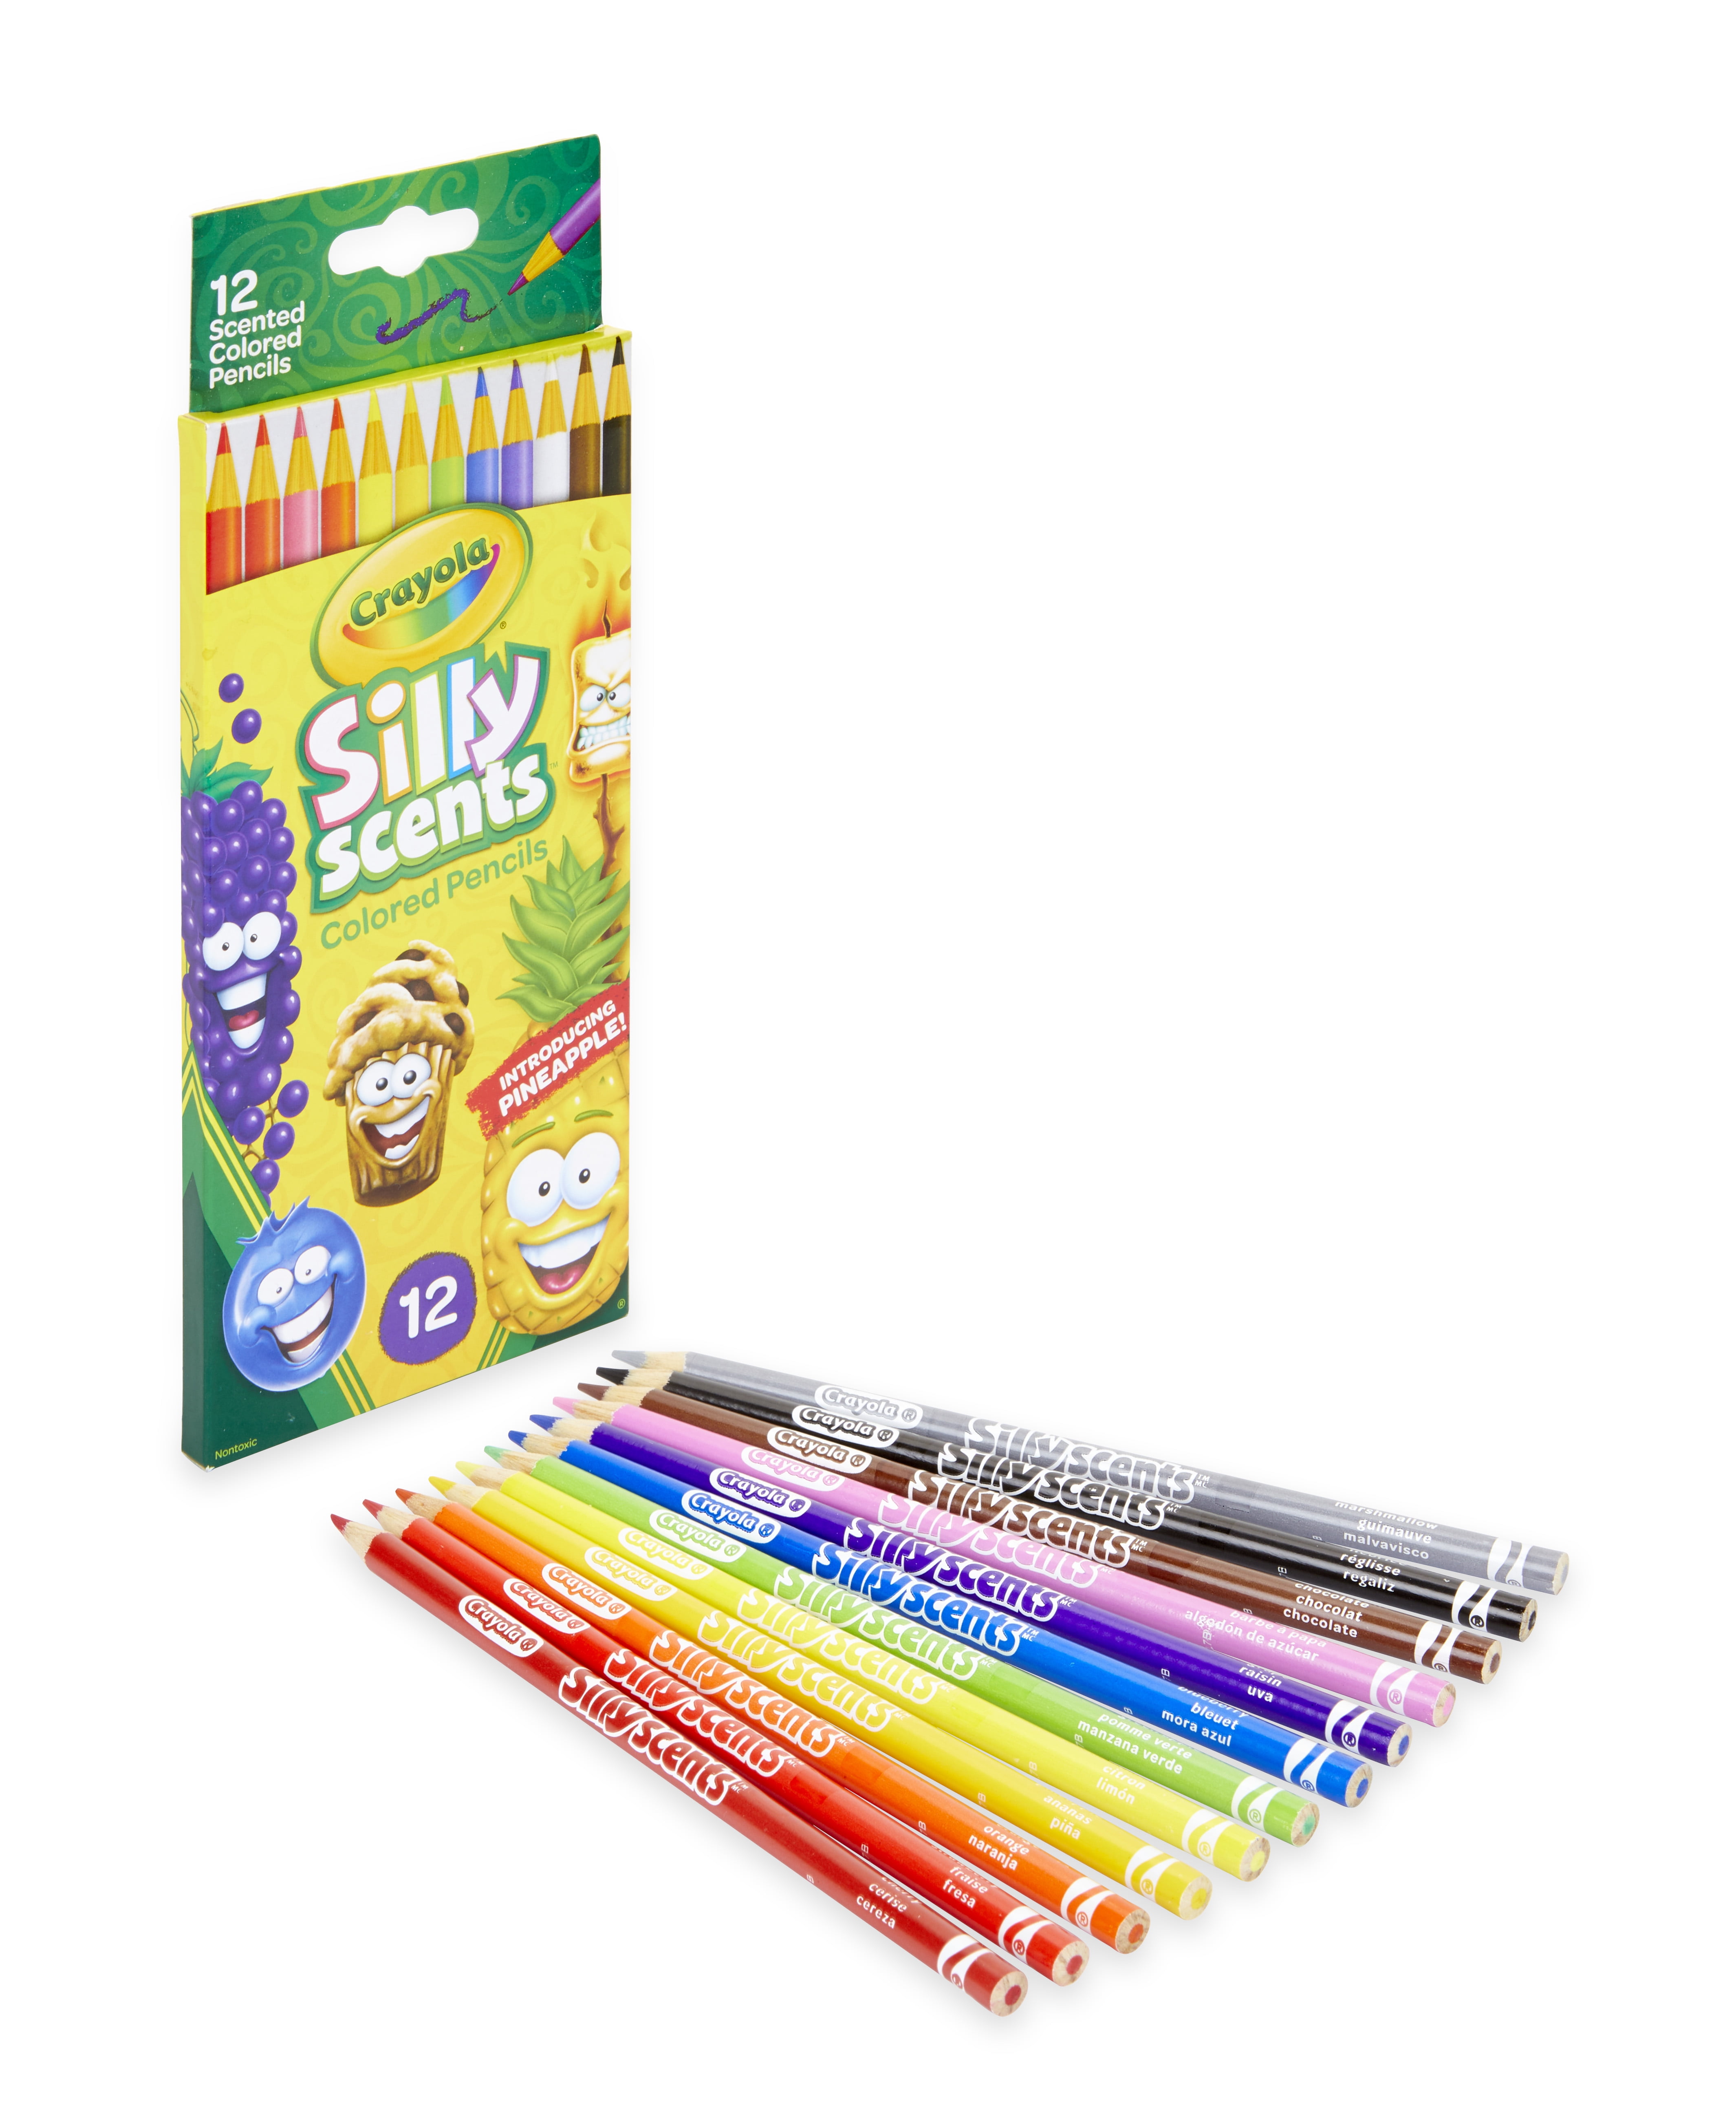 Paints Crayola Crayons Colour Pencils Markers Silly Scents and more options✅ 